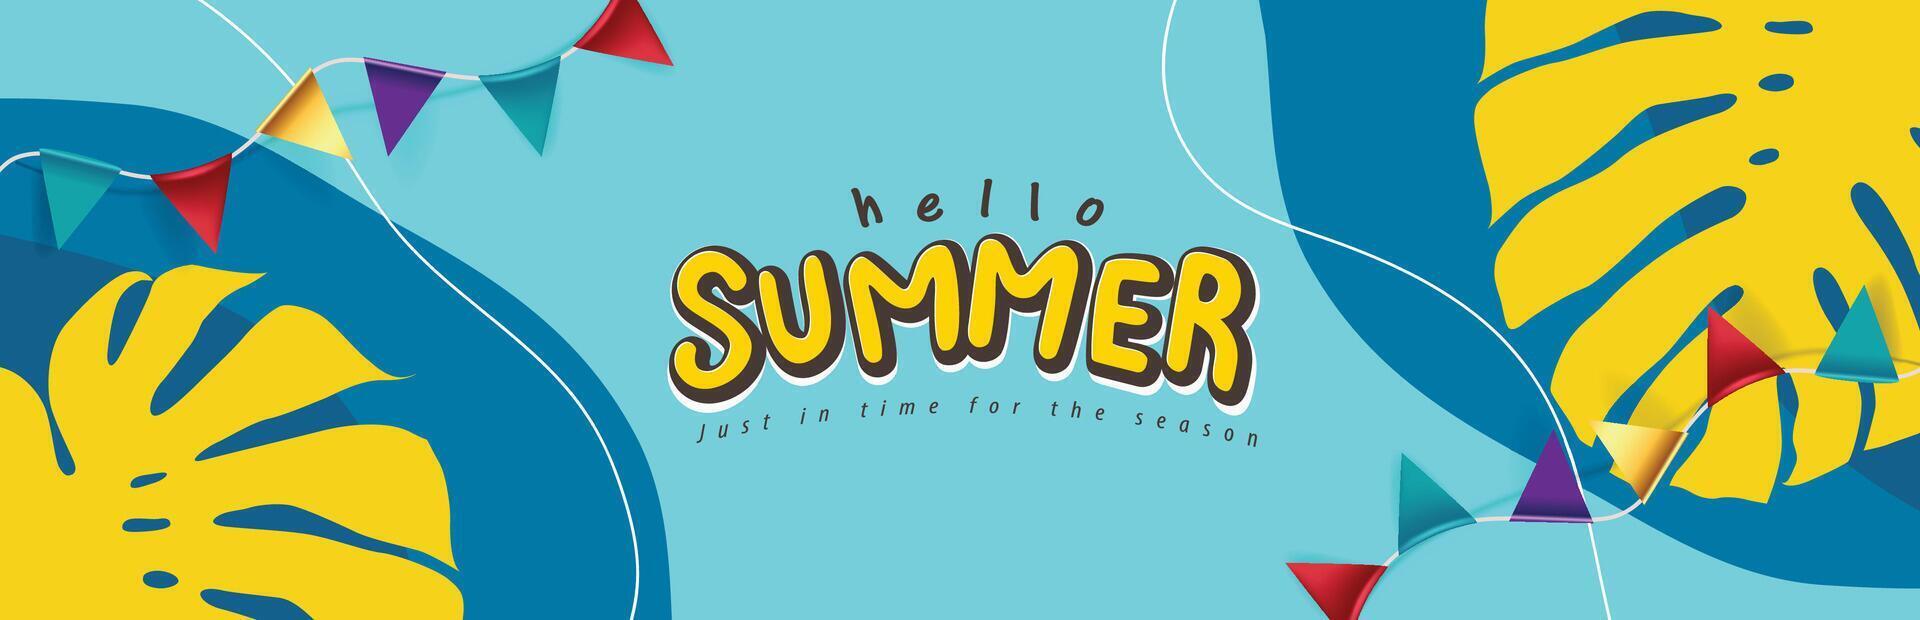 Summer promotion poster banner with summer tropical beach vibes background vector